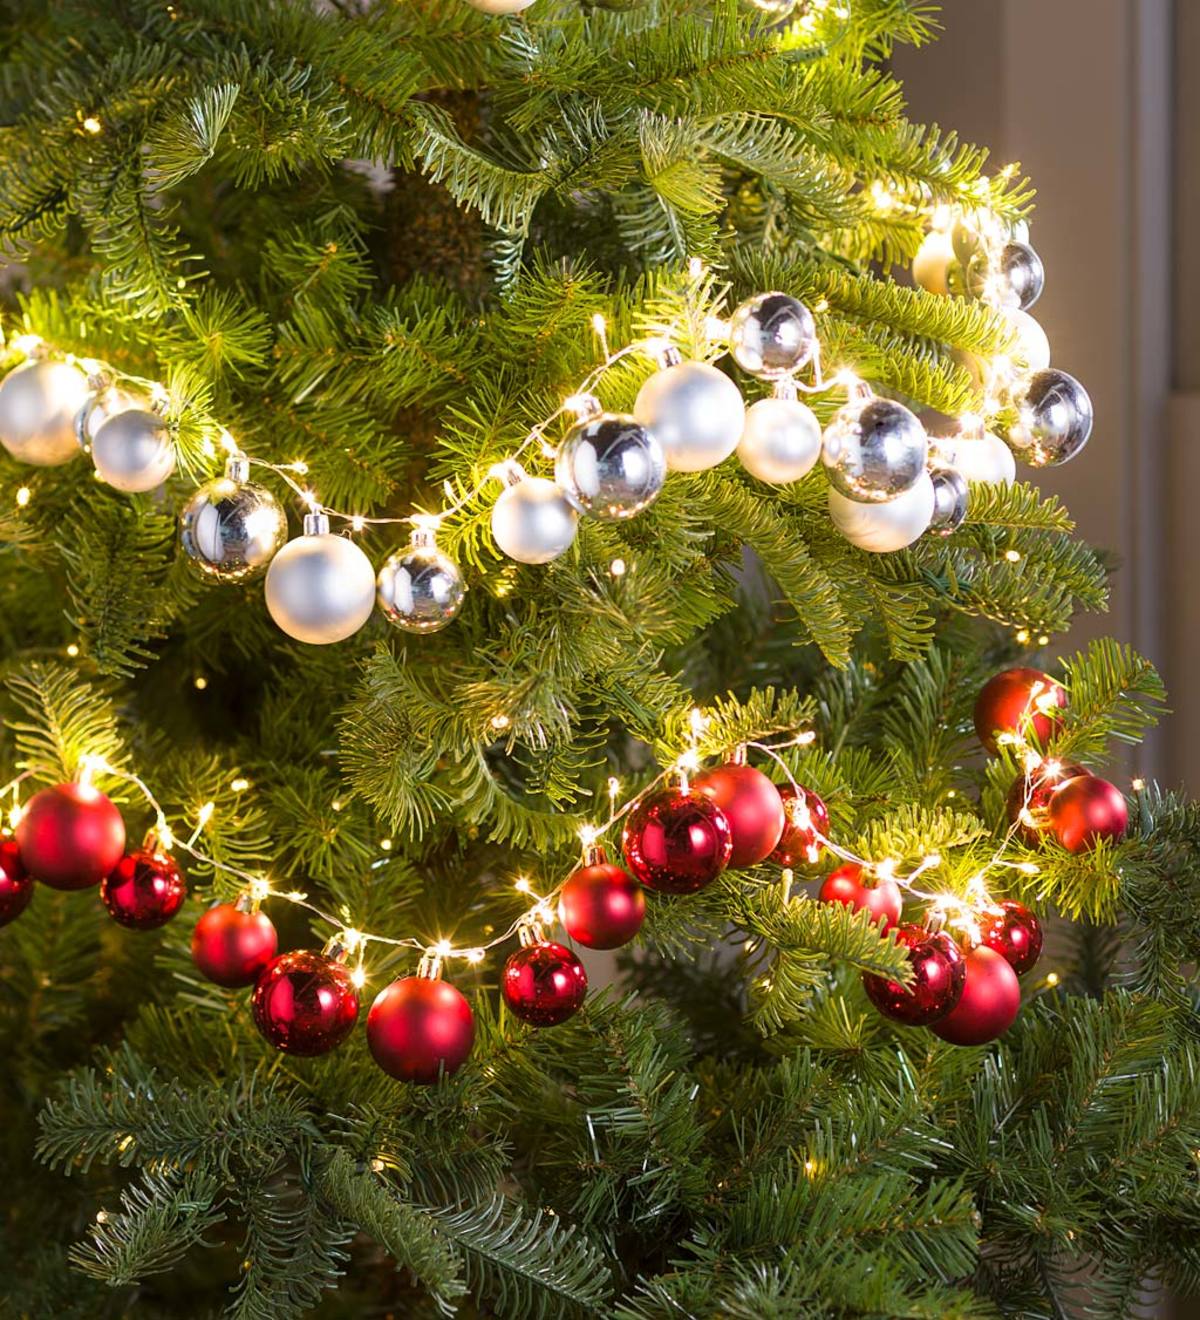 Lighted Single-Strand Shatterproof Garland with 80 LEDs and 40 Ornaments